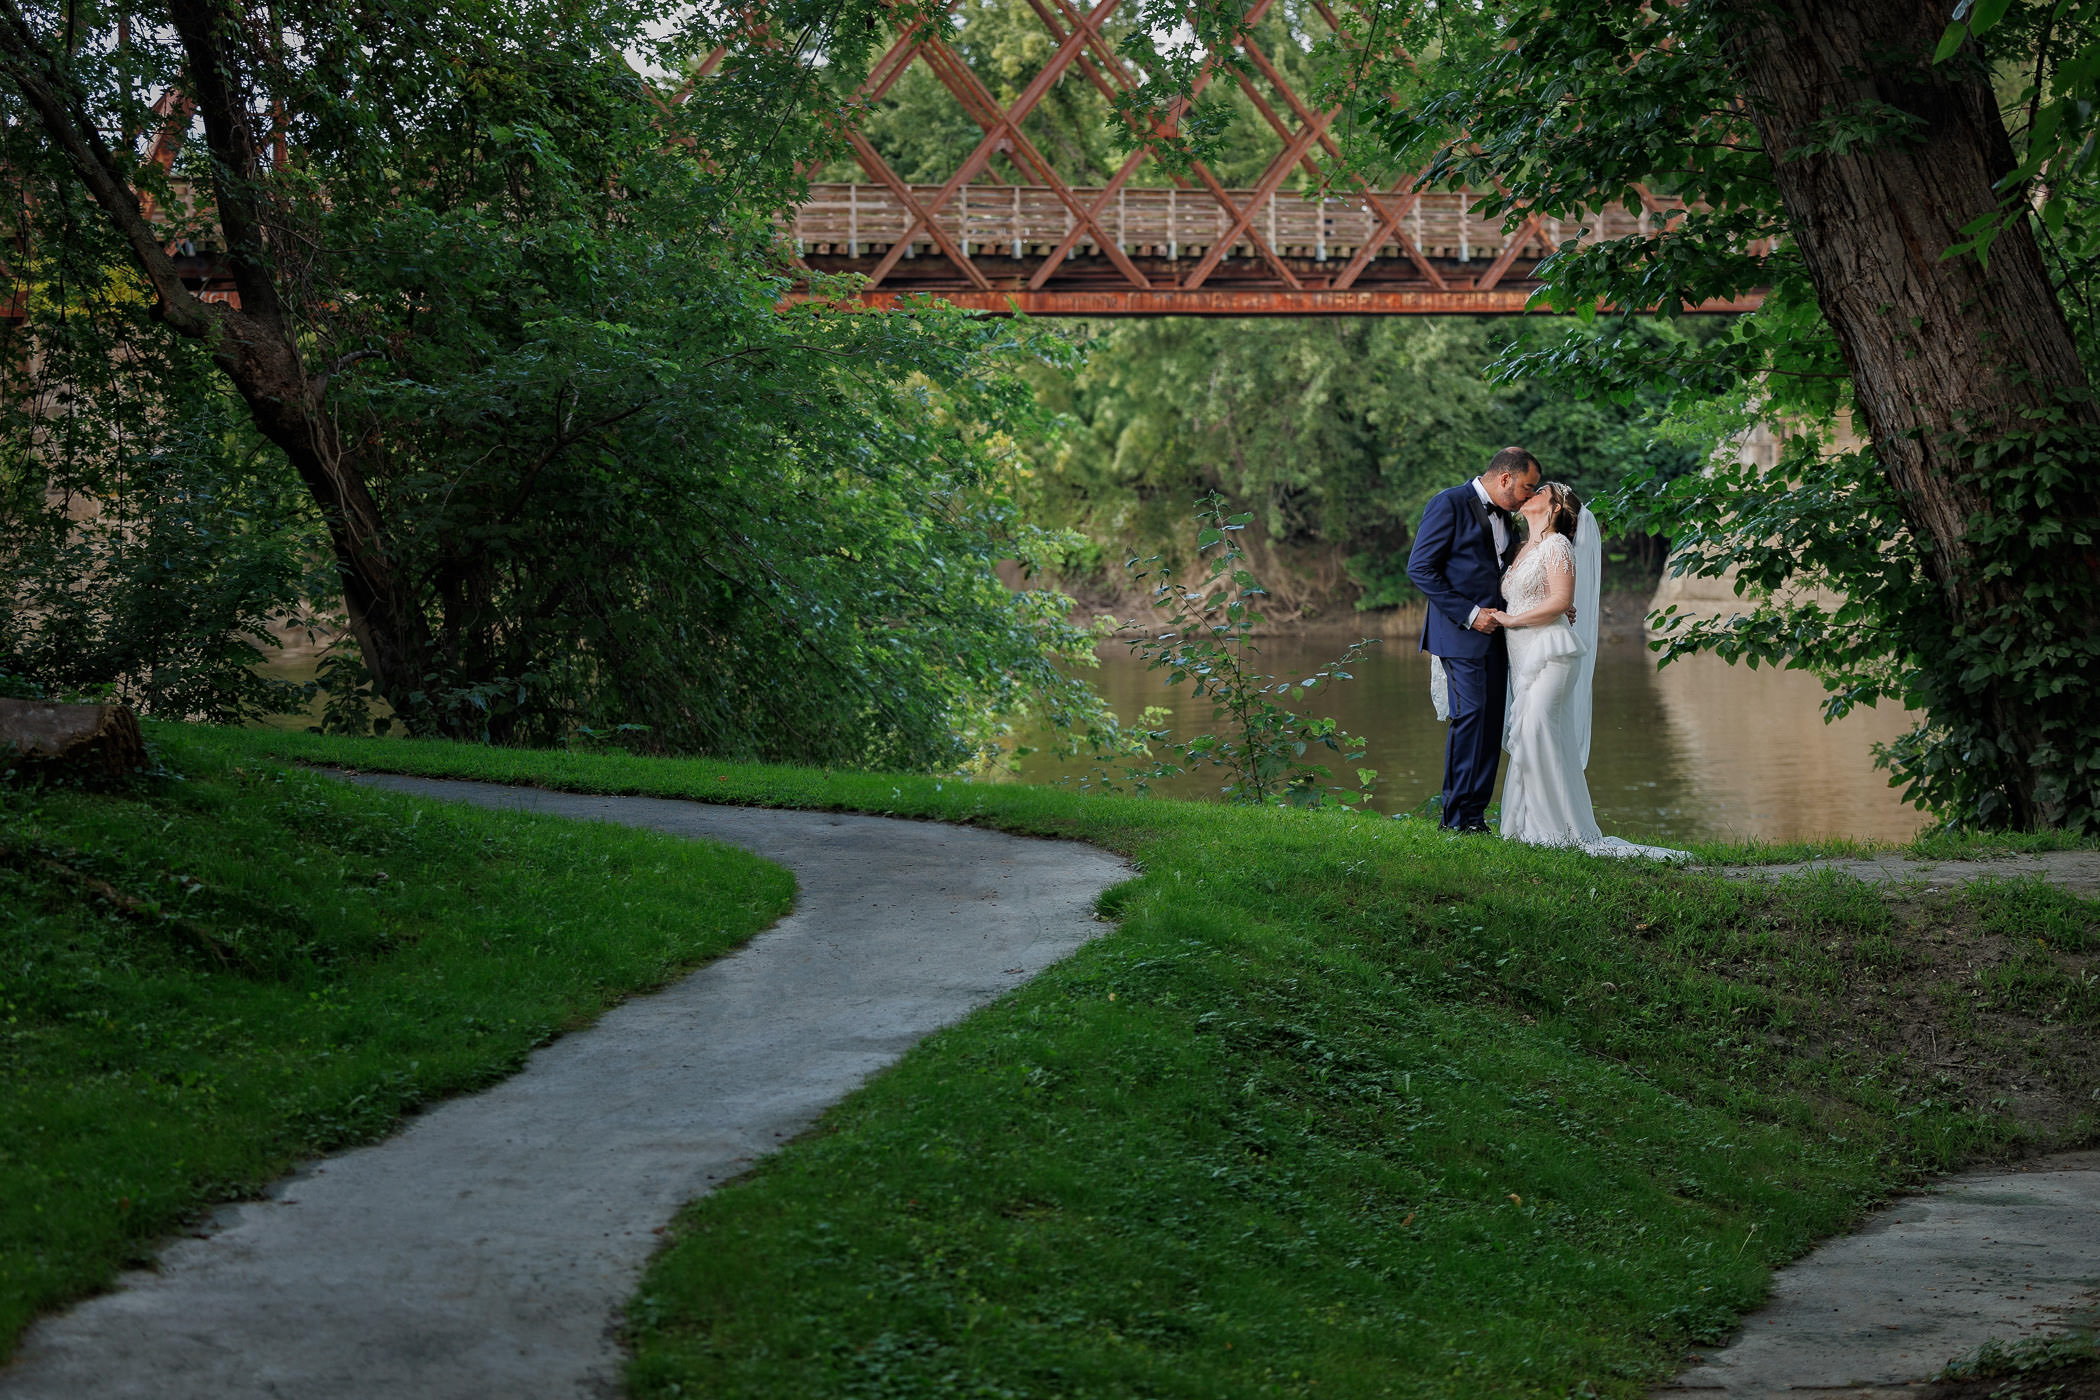 Wedding couple creative portrait in Northampton by the Ct. river.